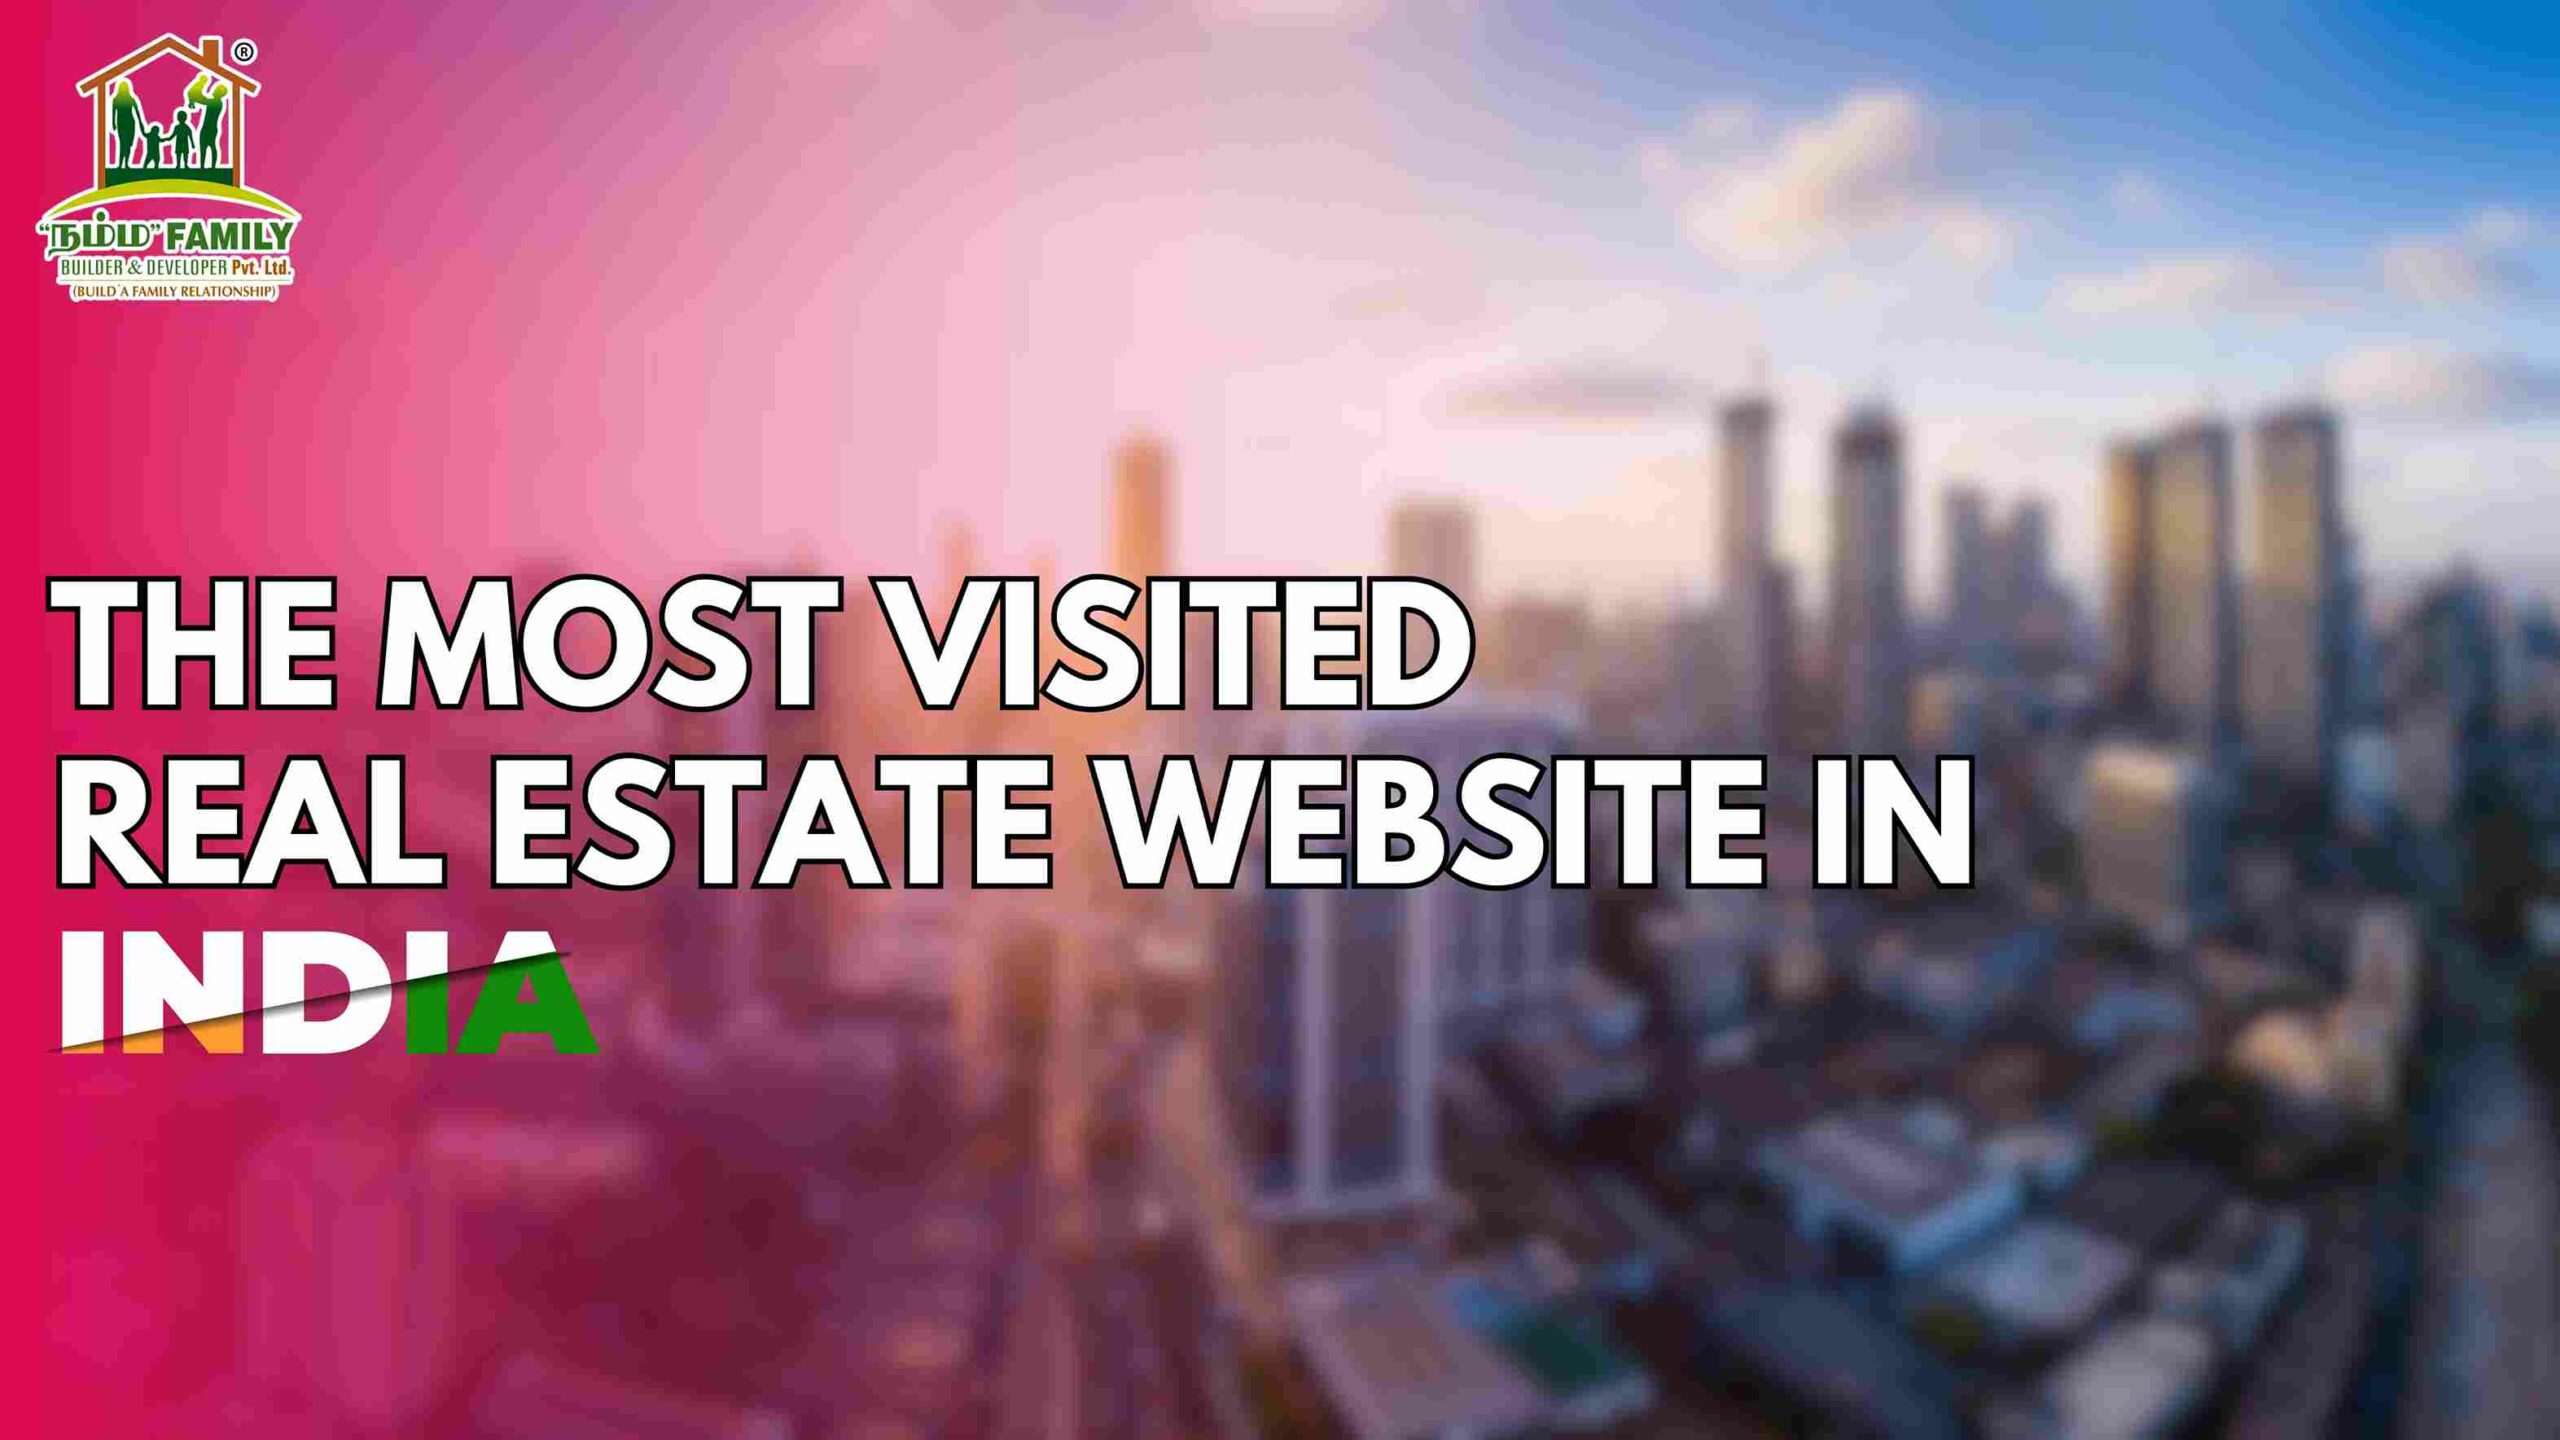 Most Visited Real Estate Websites in India - Namma Family Builder